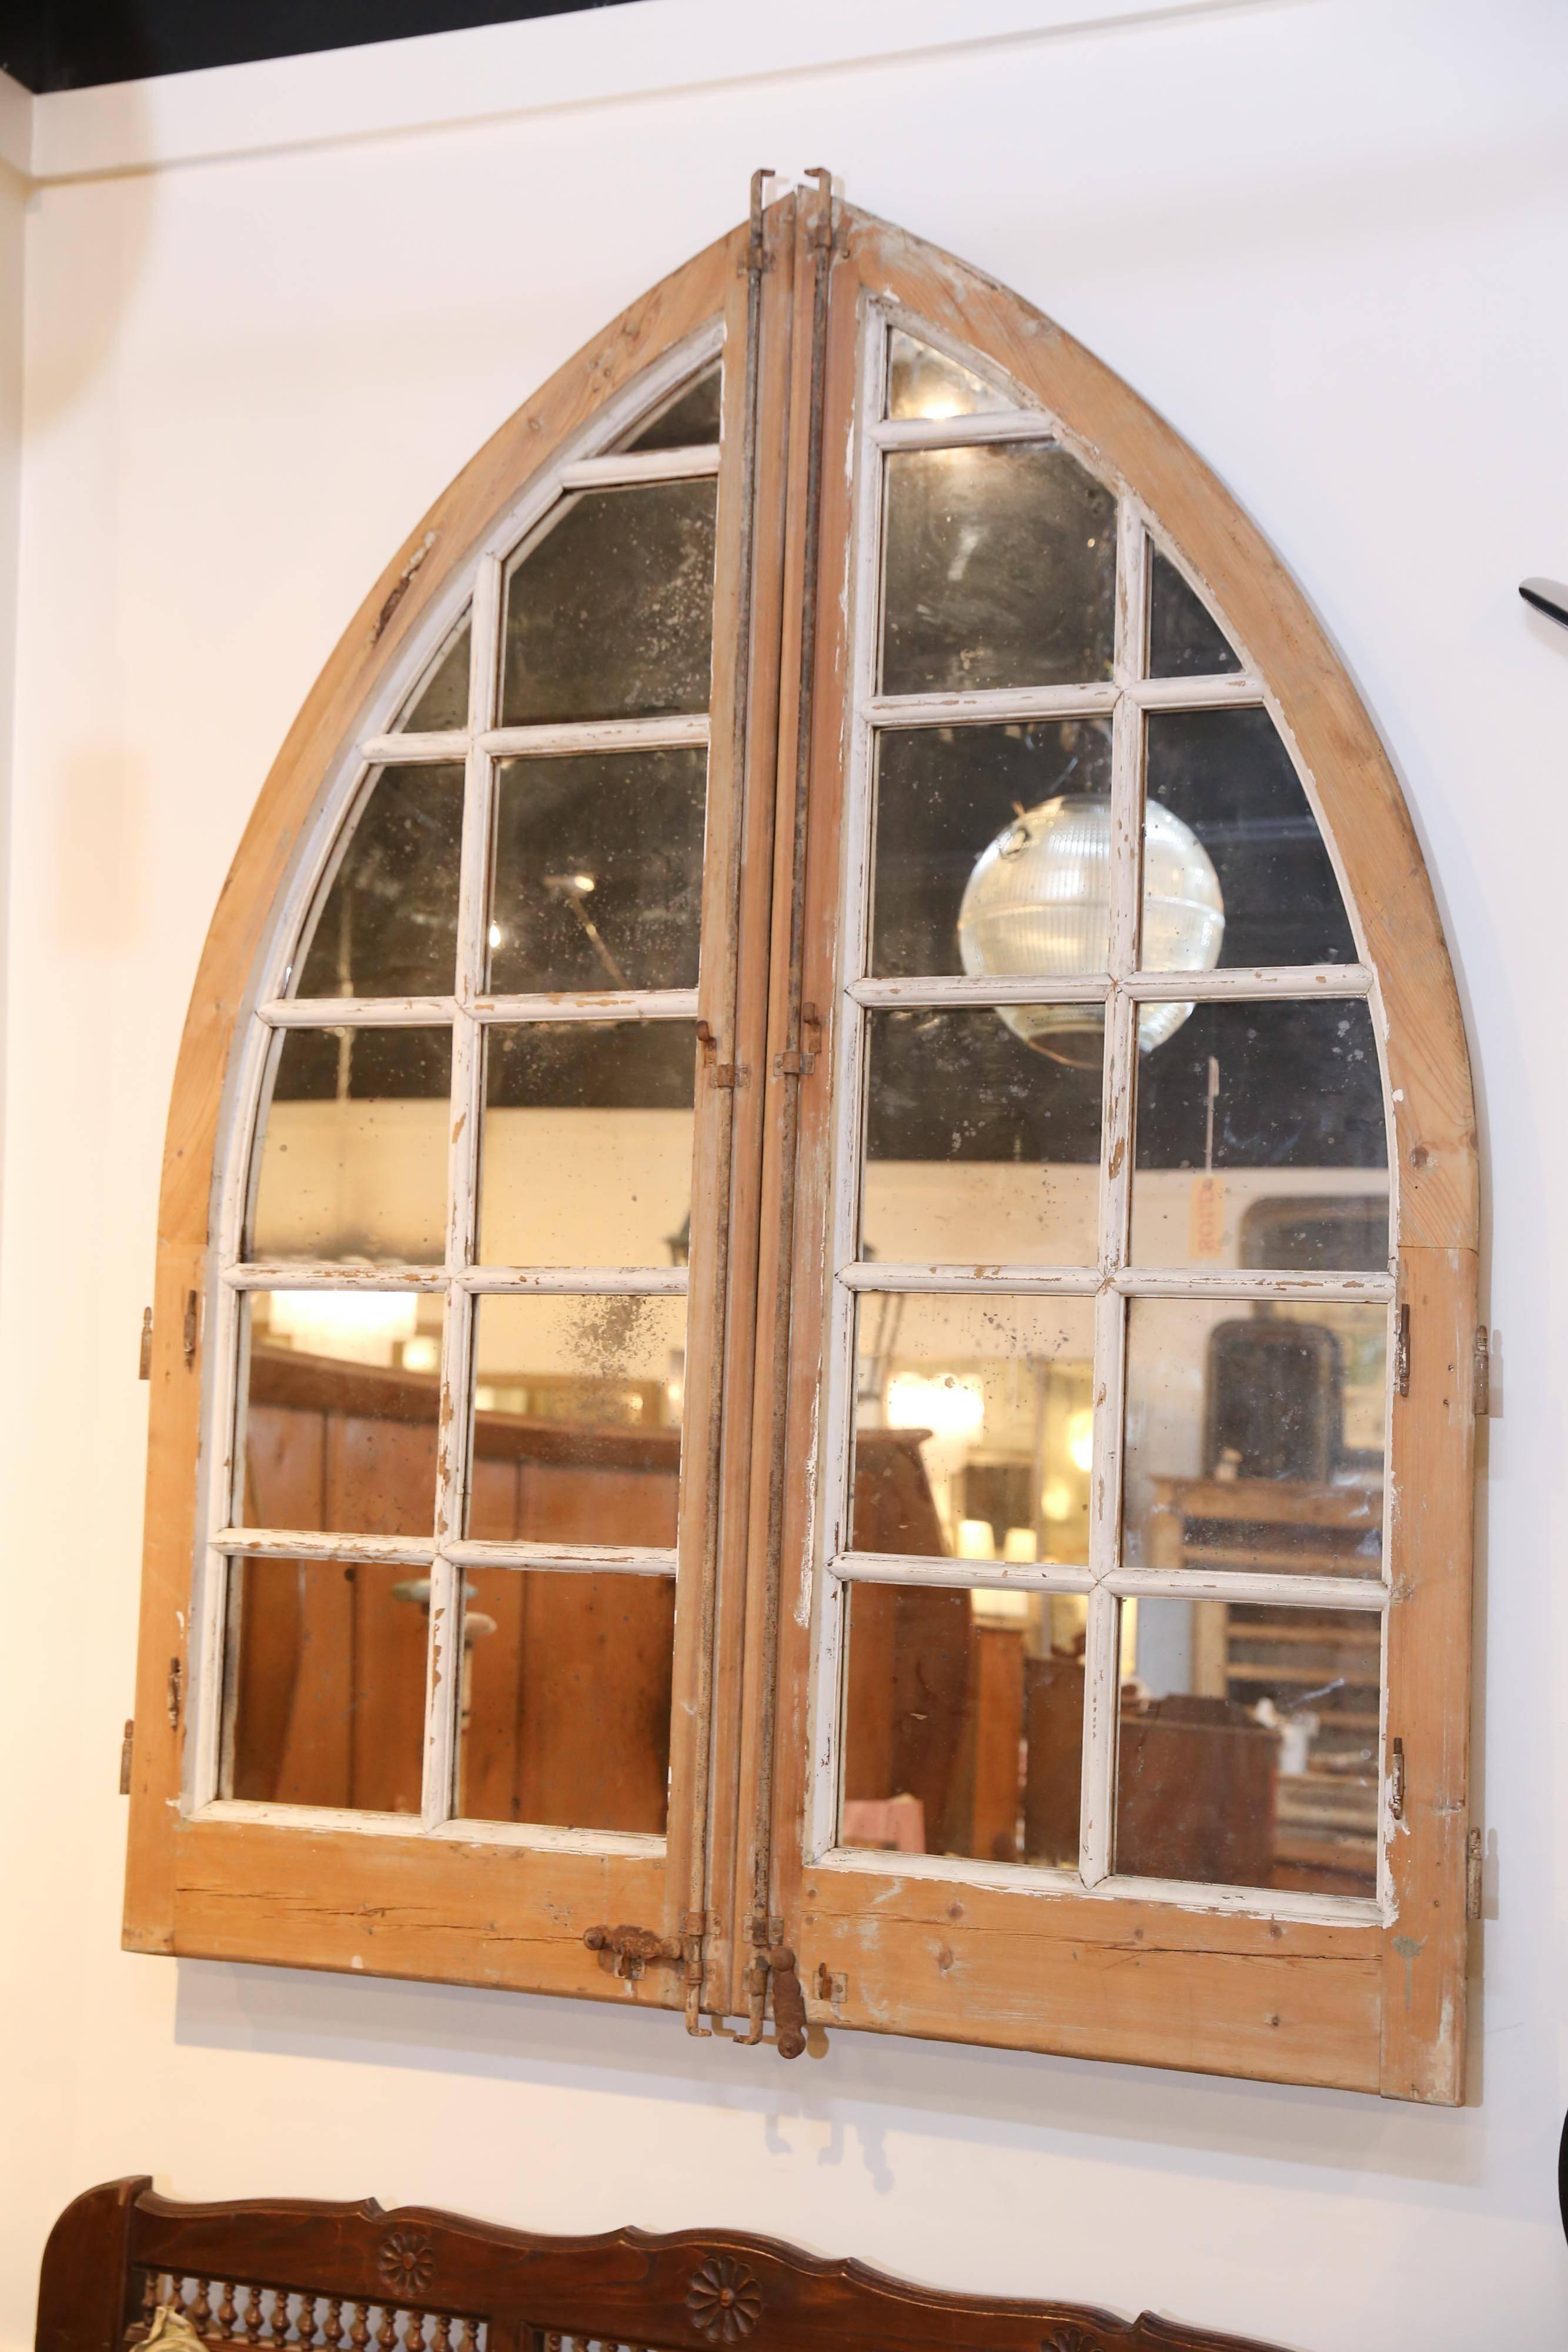 Pair of Mirrors from Arched Windows 3